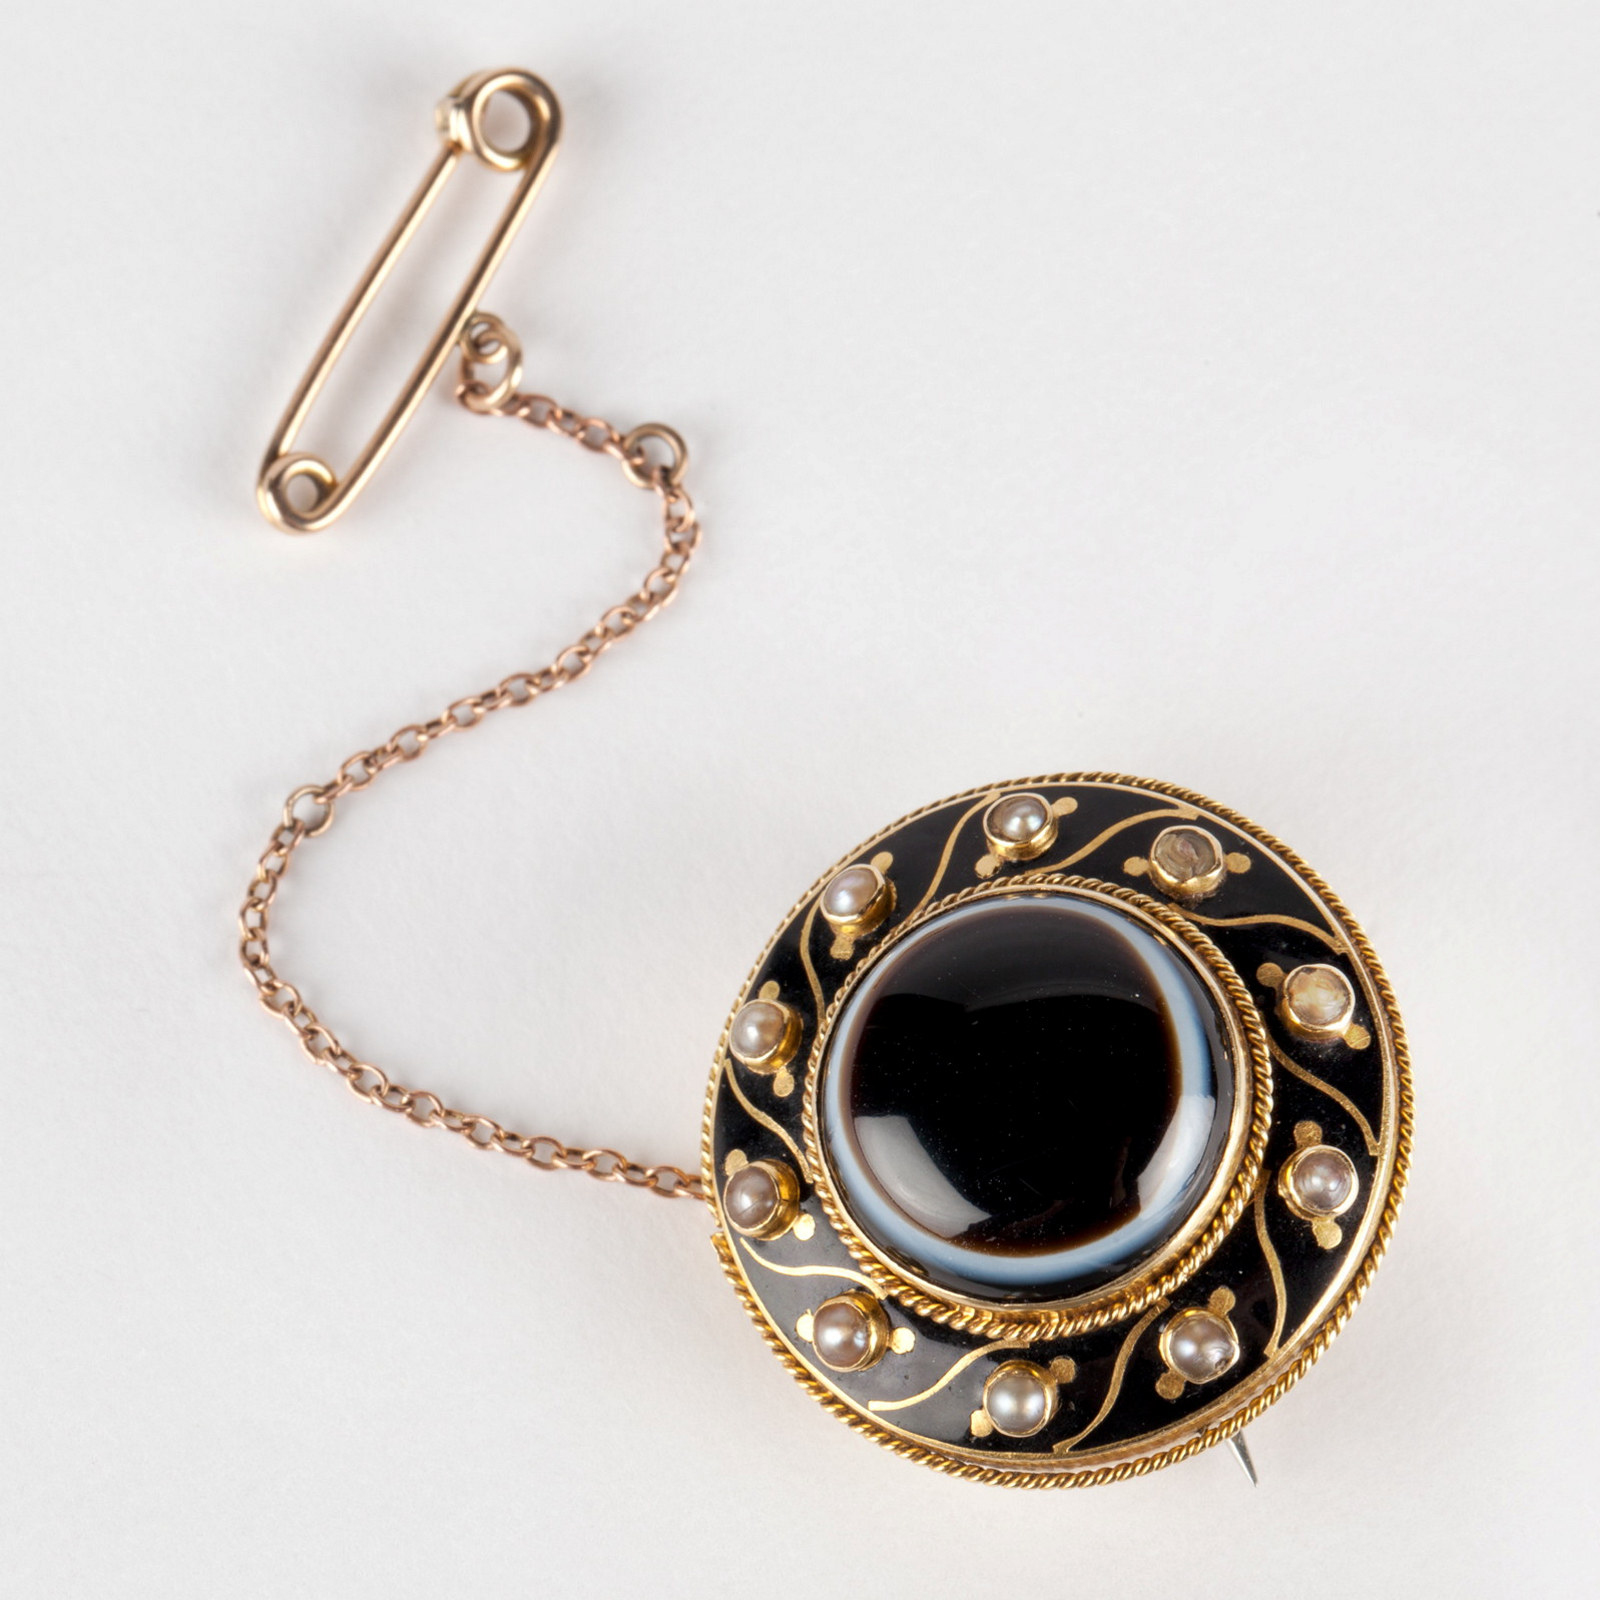 Gold and black round enamel brooch set with dark banded onyx and seed pearls, circa 1870